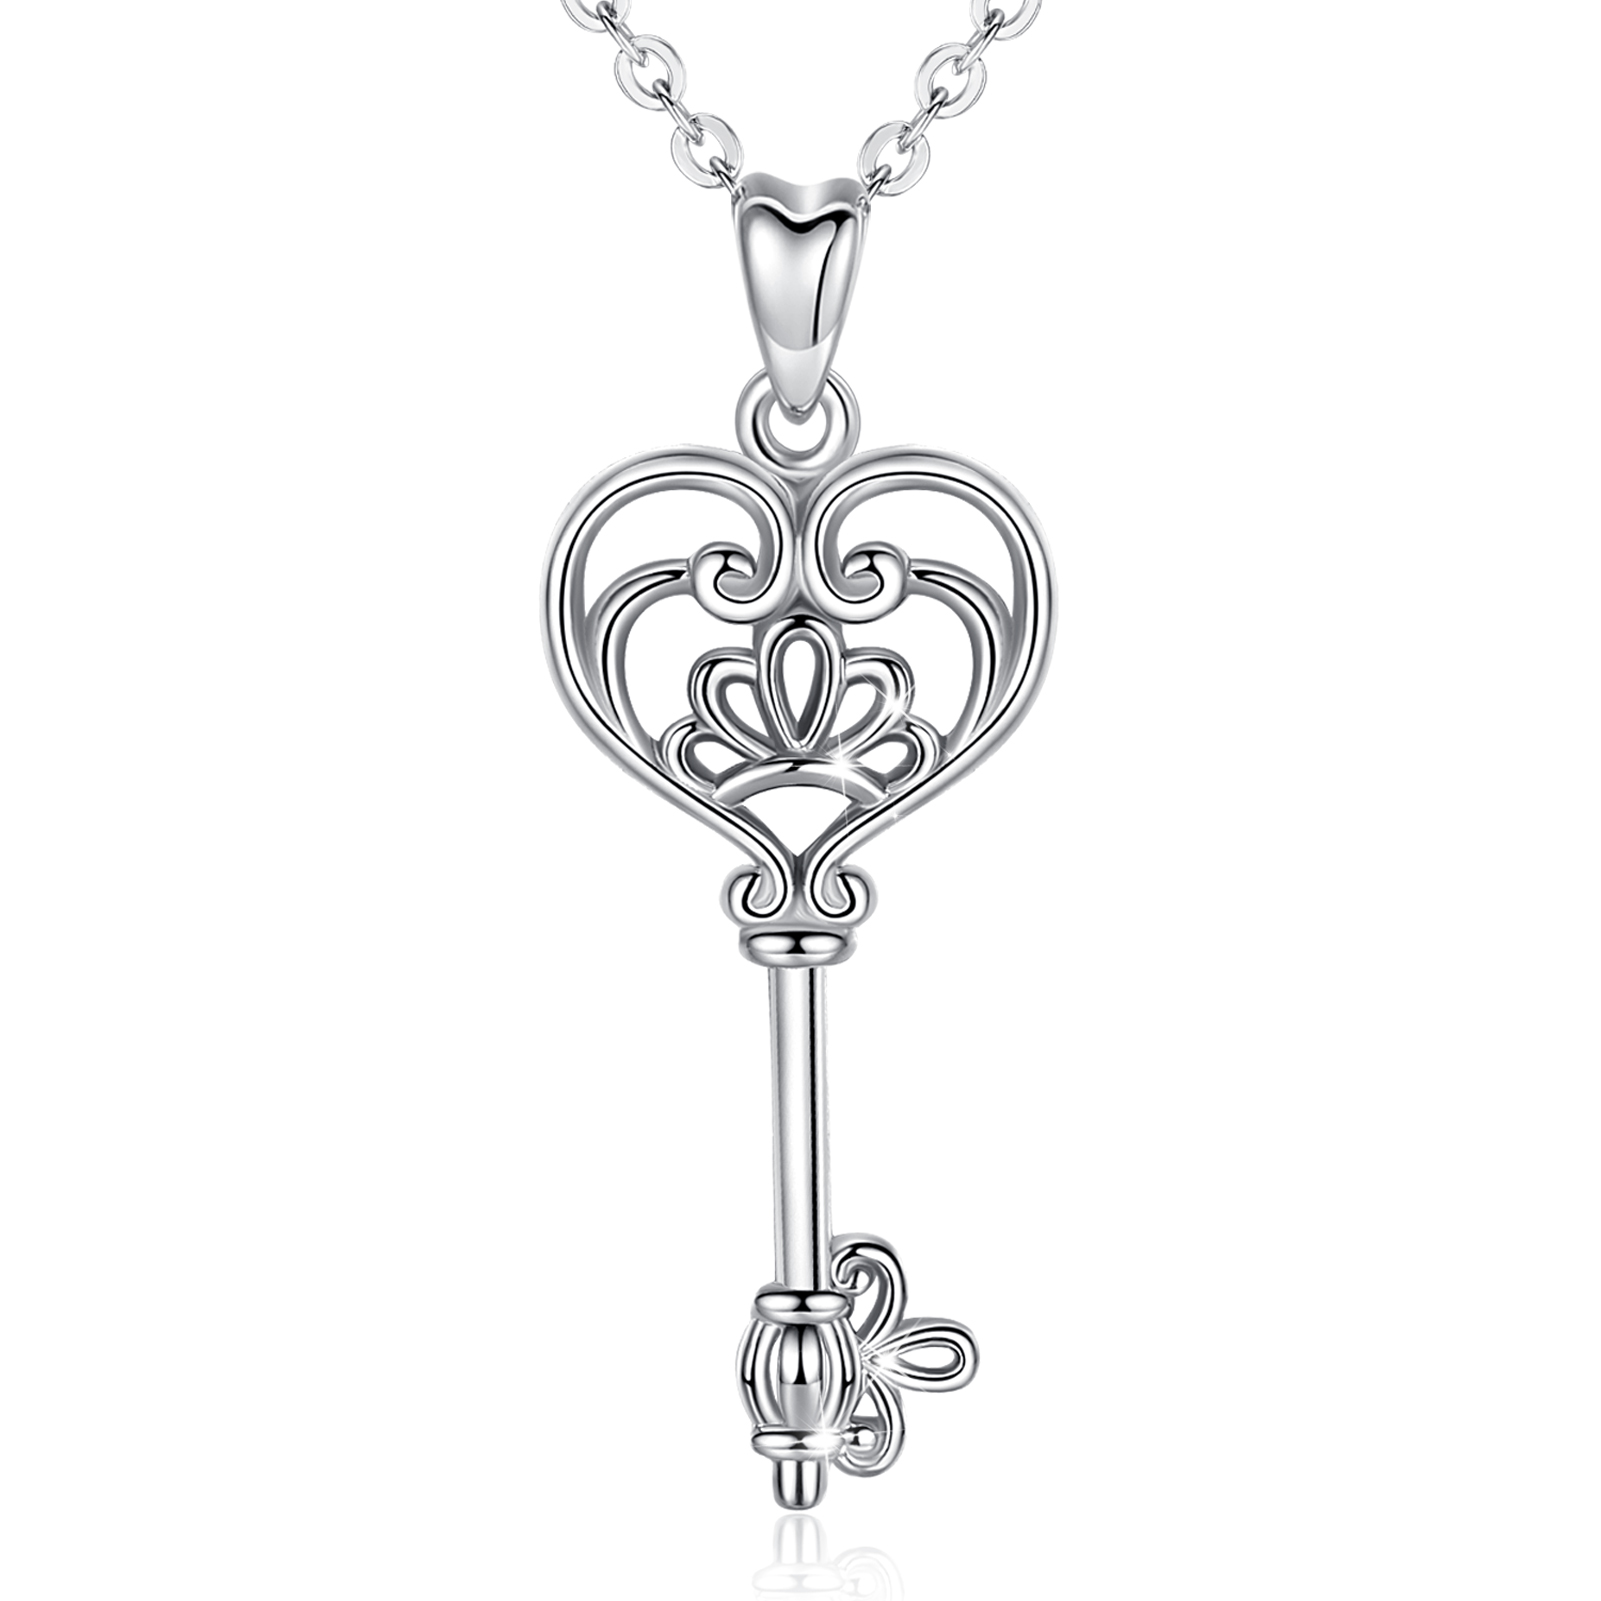 Merryshine Jewelry Infinite Love S925 Sterling Silver Key Pendant Necklace For Couple